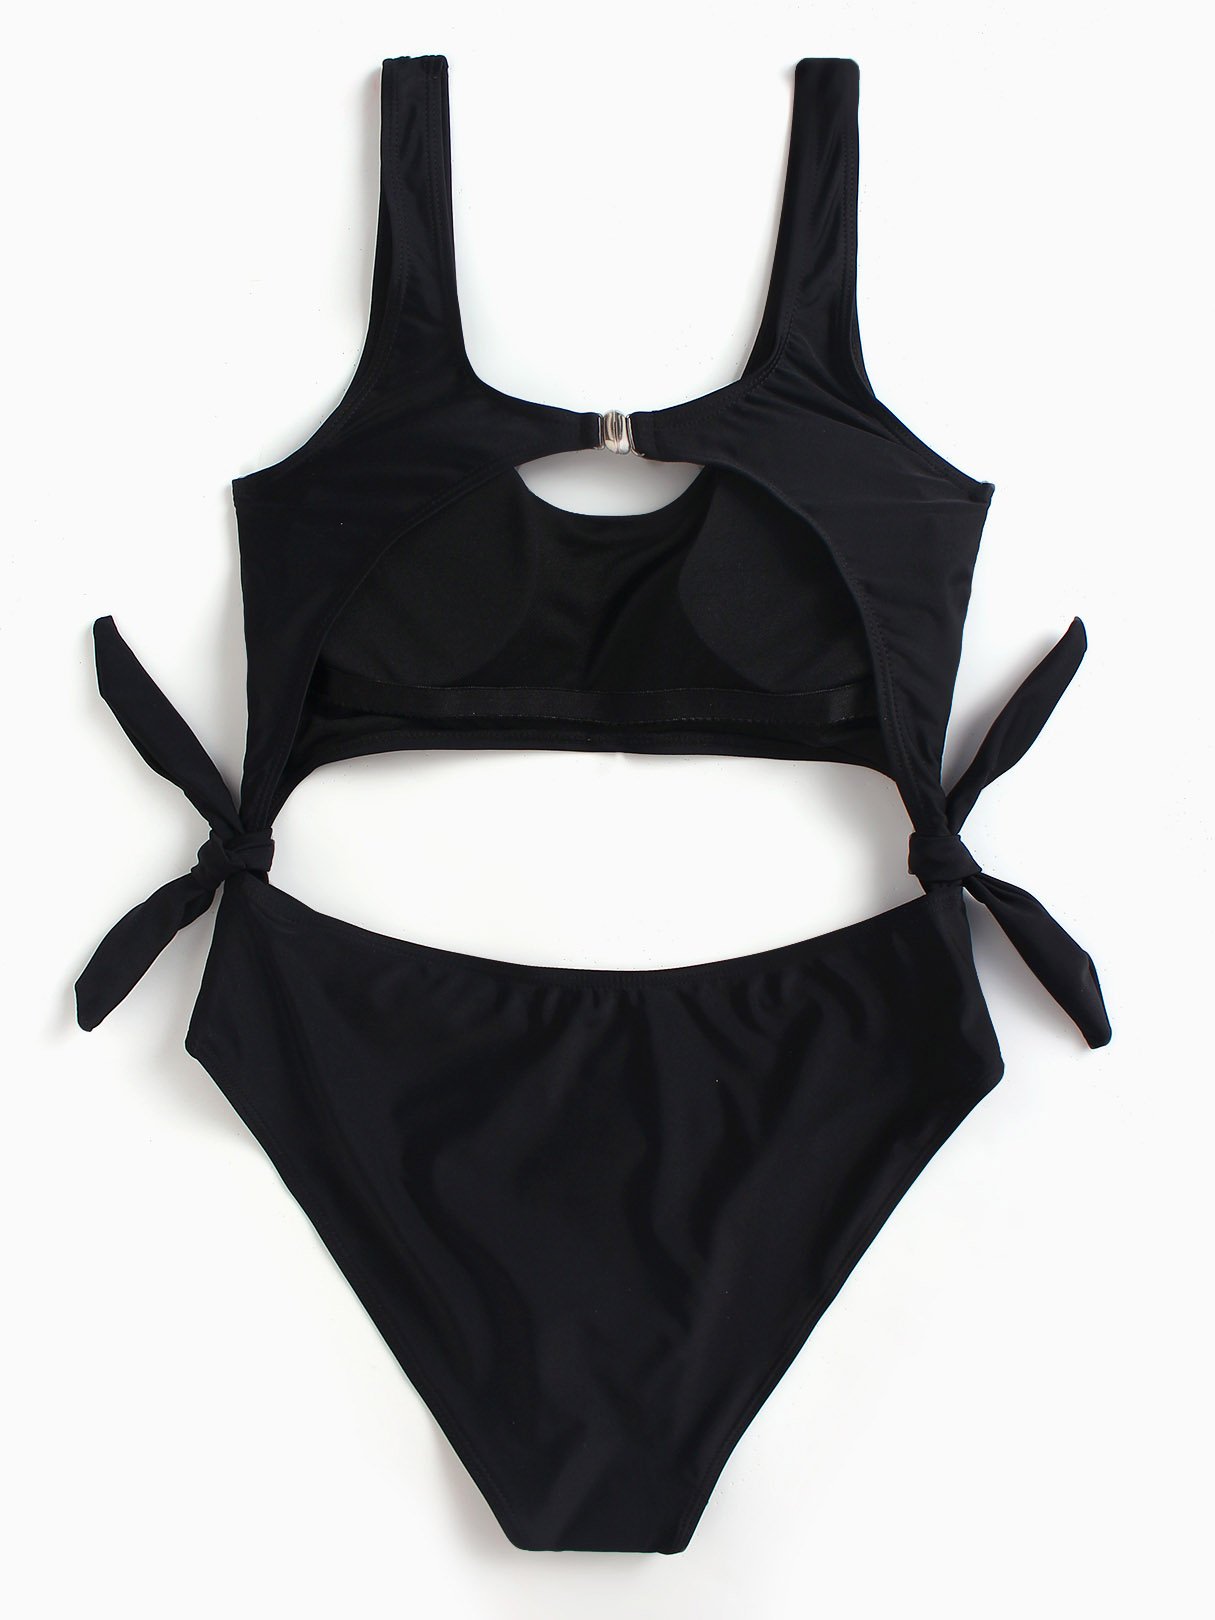 NEW FEELING Womens Black One-Pieces